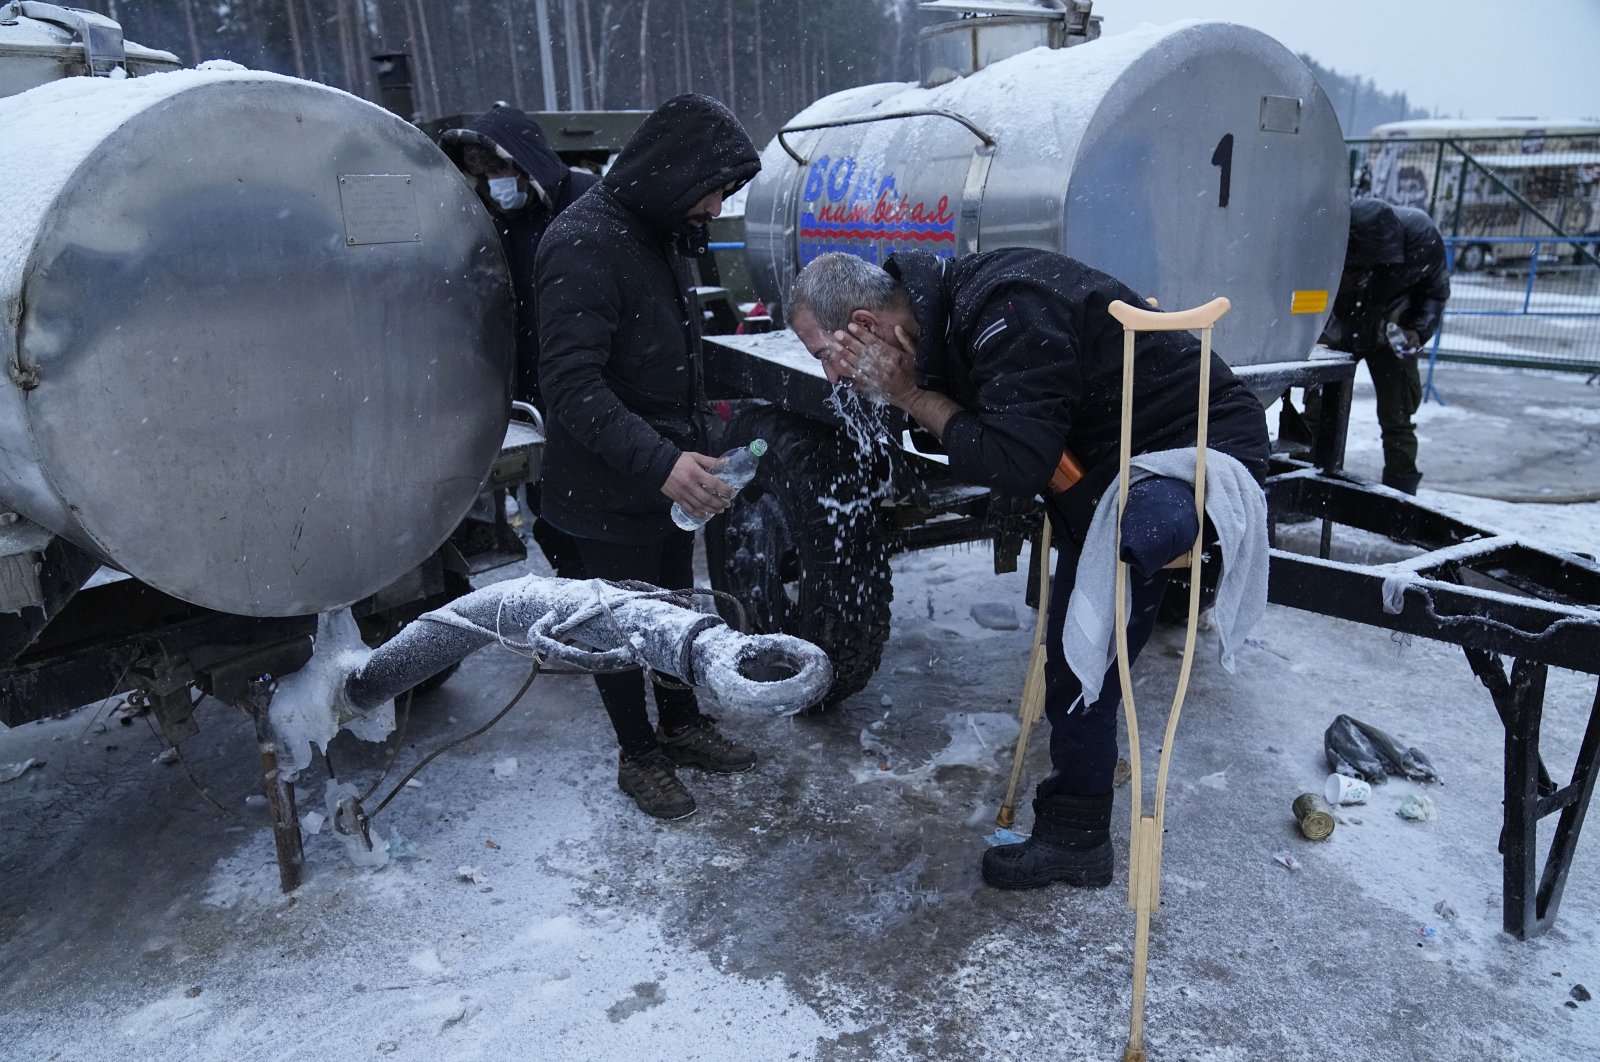 A migrant washes his head with cold water at the &quot;Bruzgi&quot; checkpoint logistics center at the Belarus-Poland border near Grodno, Belarus, Dec. 23, 2021. (AP Photo)